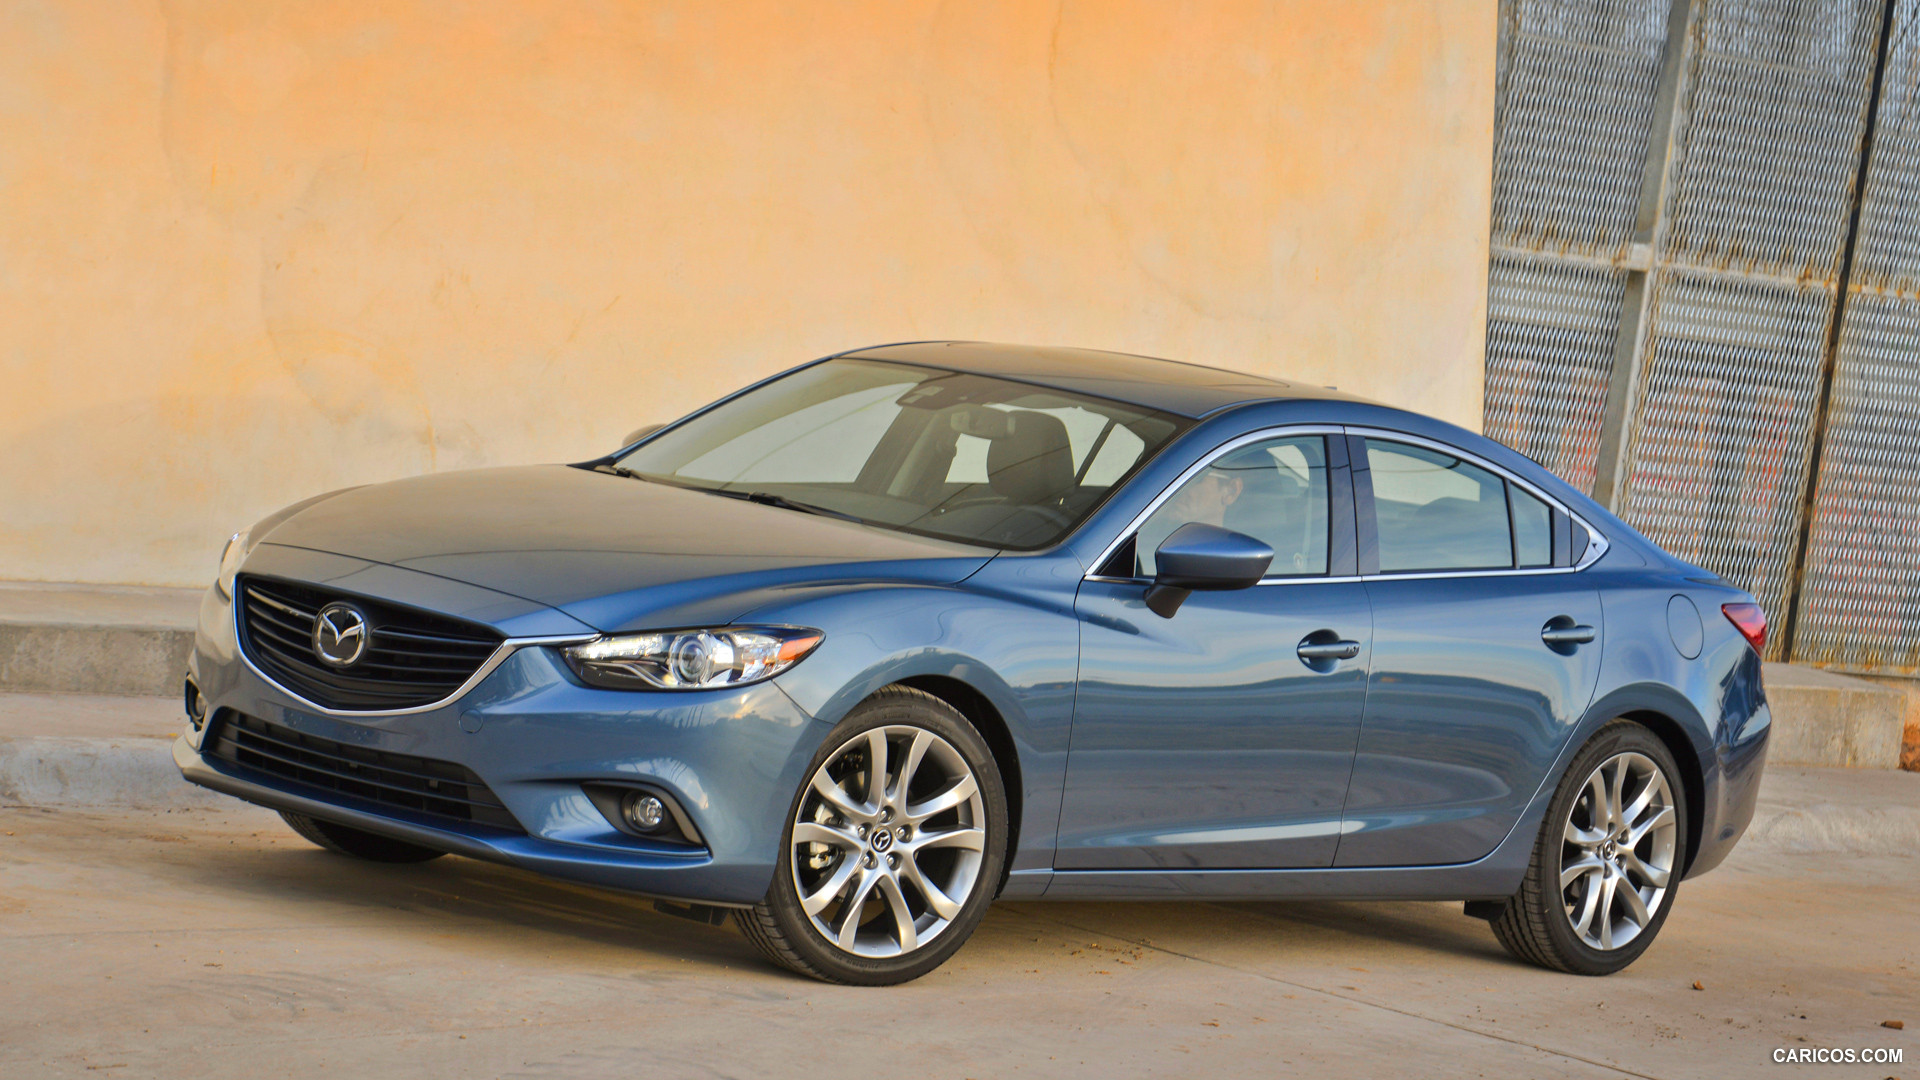 2014 Mazda6 GT - Front, #134 of 179